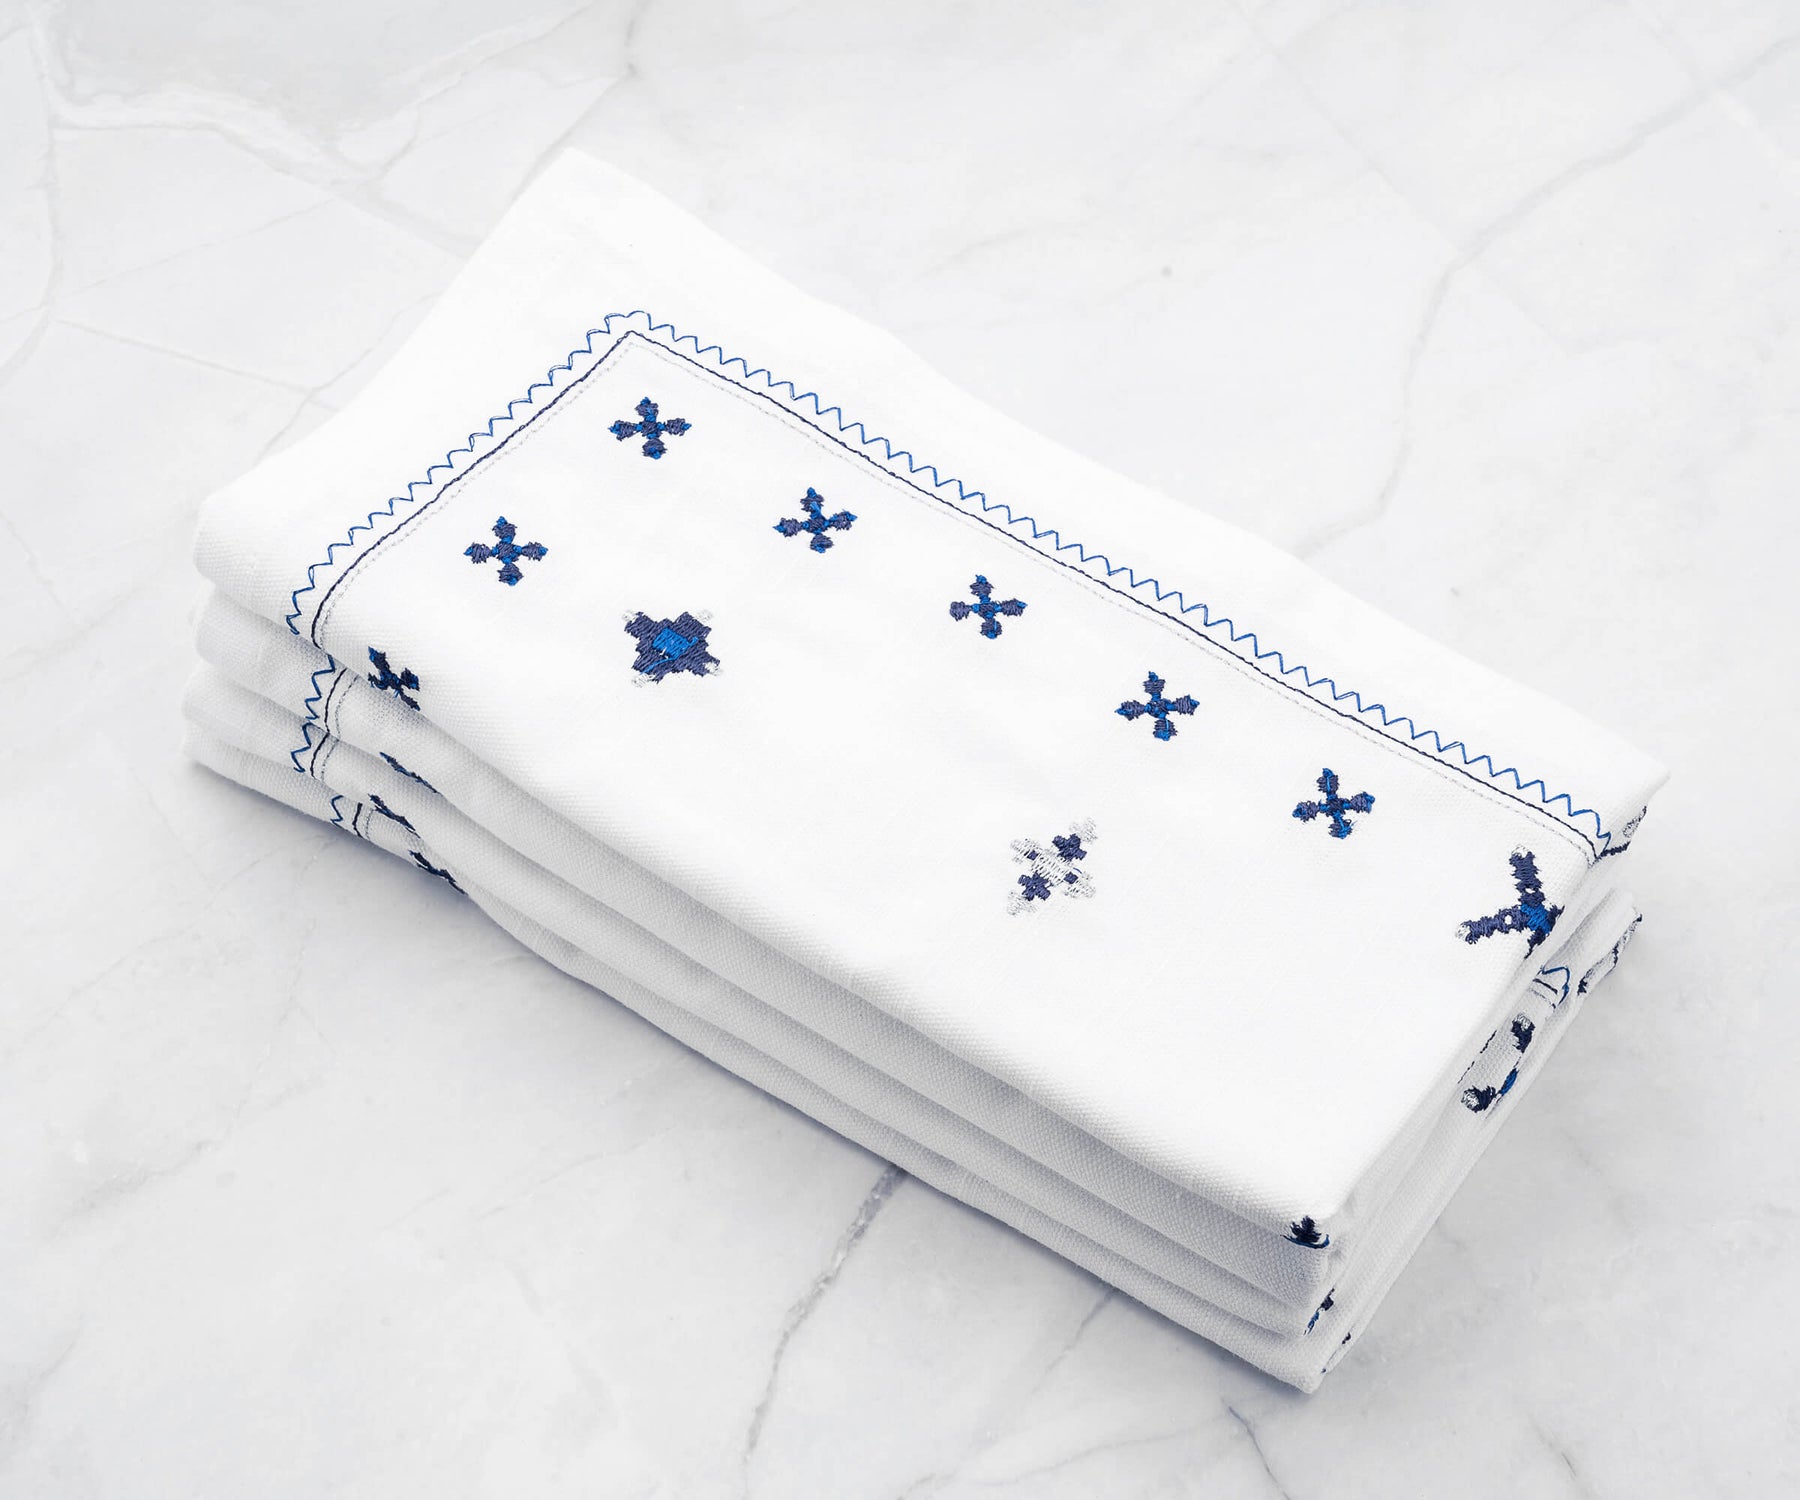 How to Clean and Get Stains Out of White Cloth Napkins